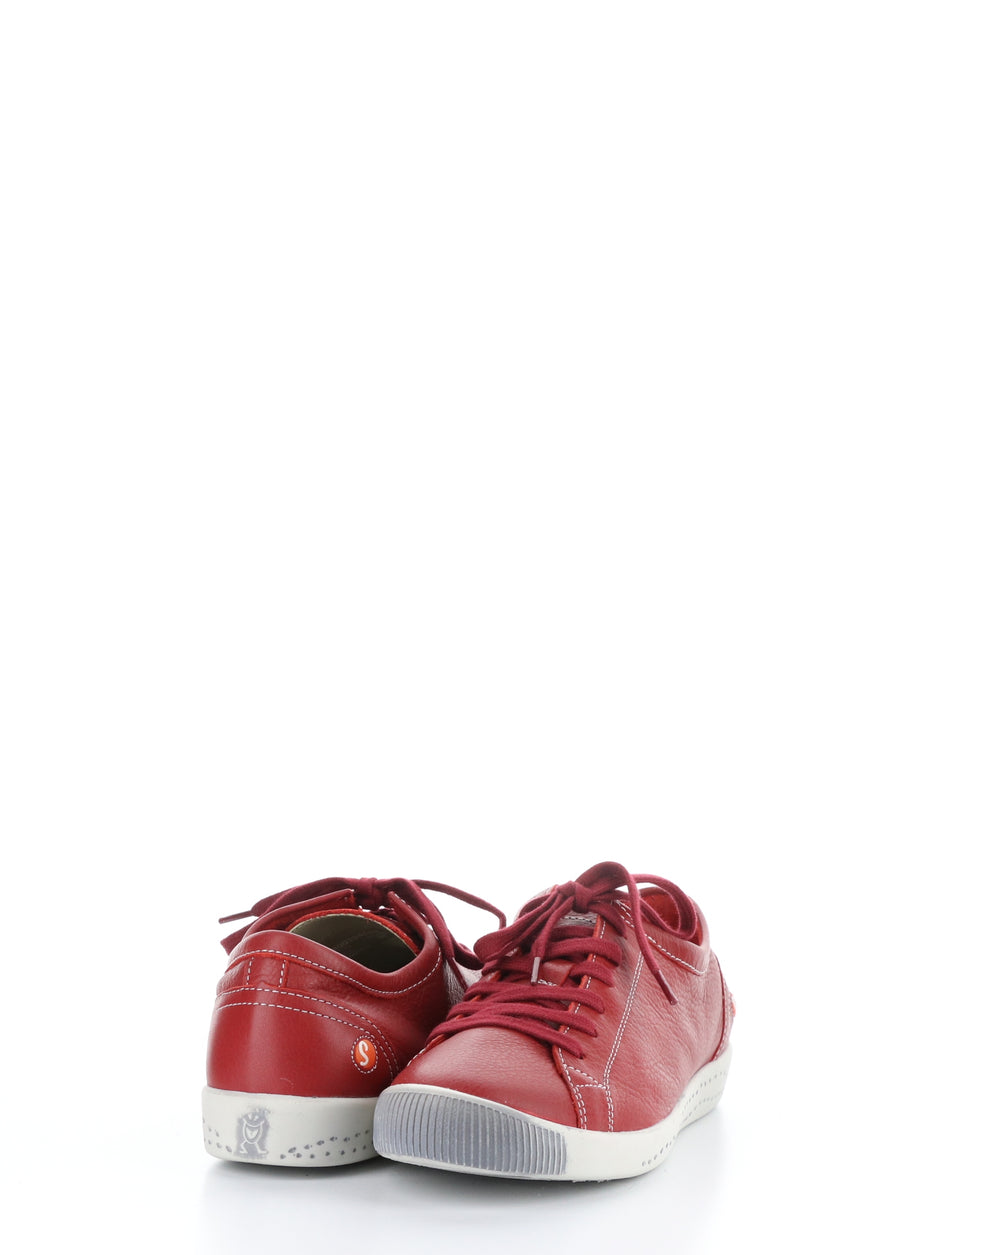 ISLA154SOF 566 RED Lace-up Shoes